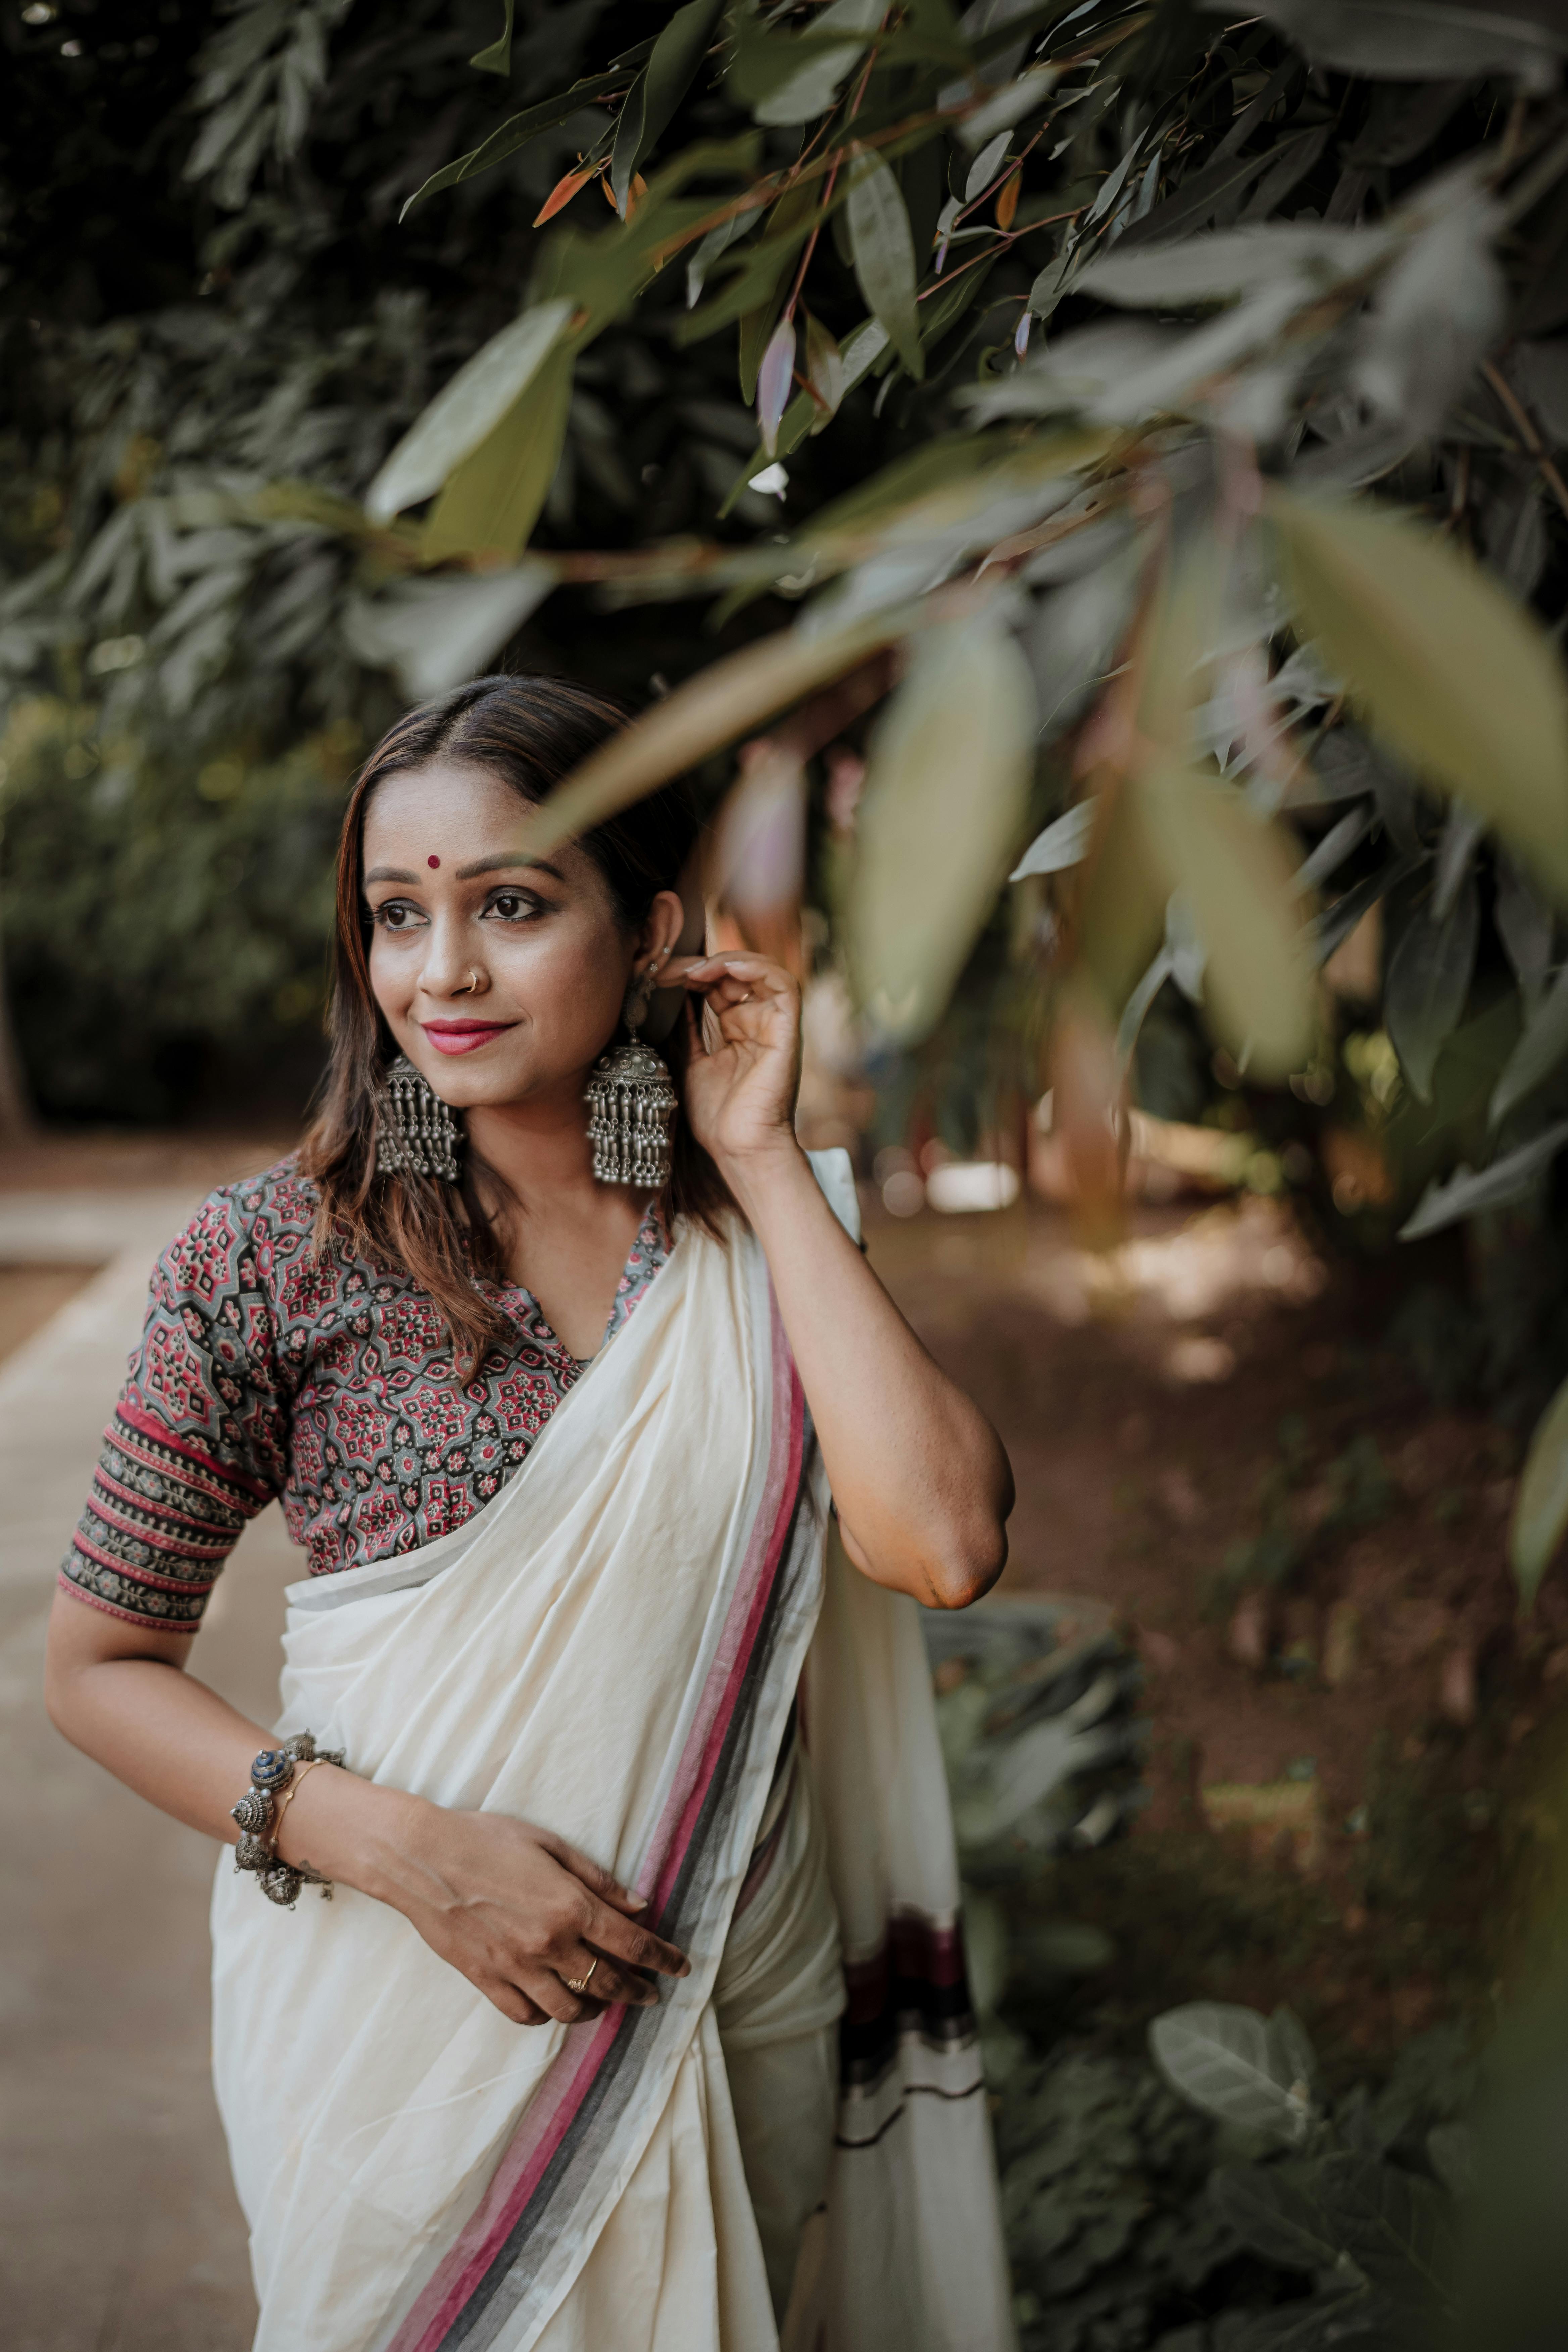 Free: Selective Focus Photo of Standing Woman in Saree Dress Posing With  Trees in the Background - nohat.cc